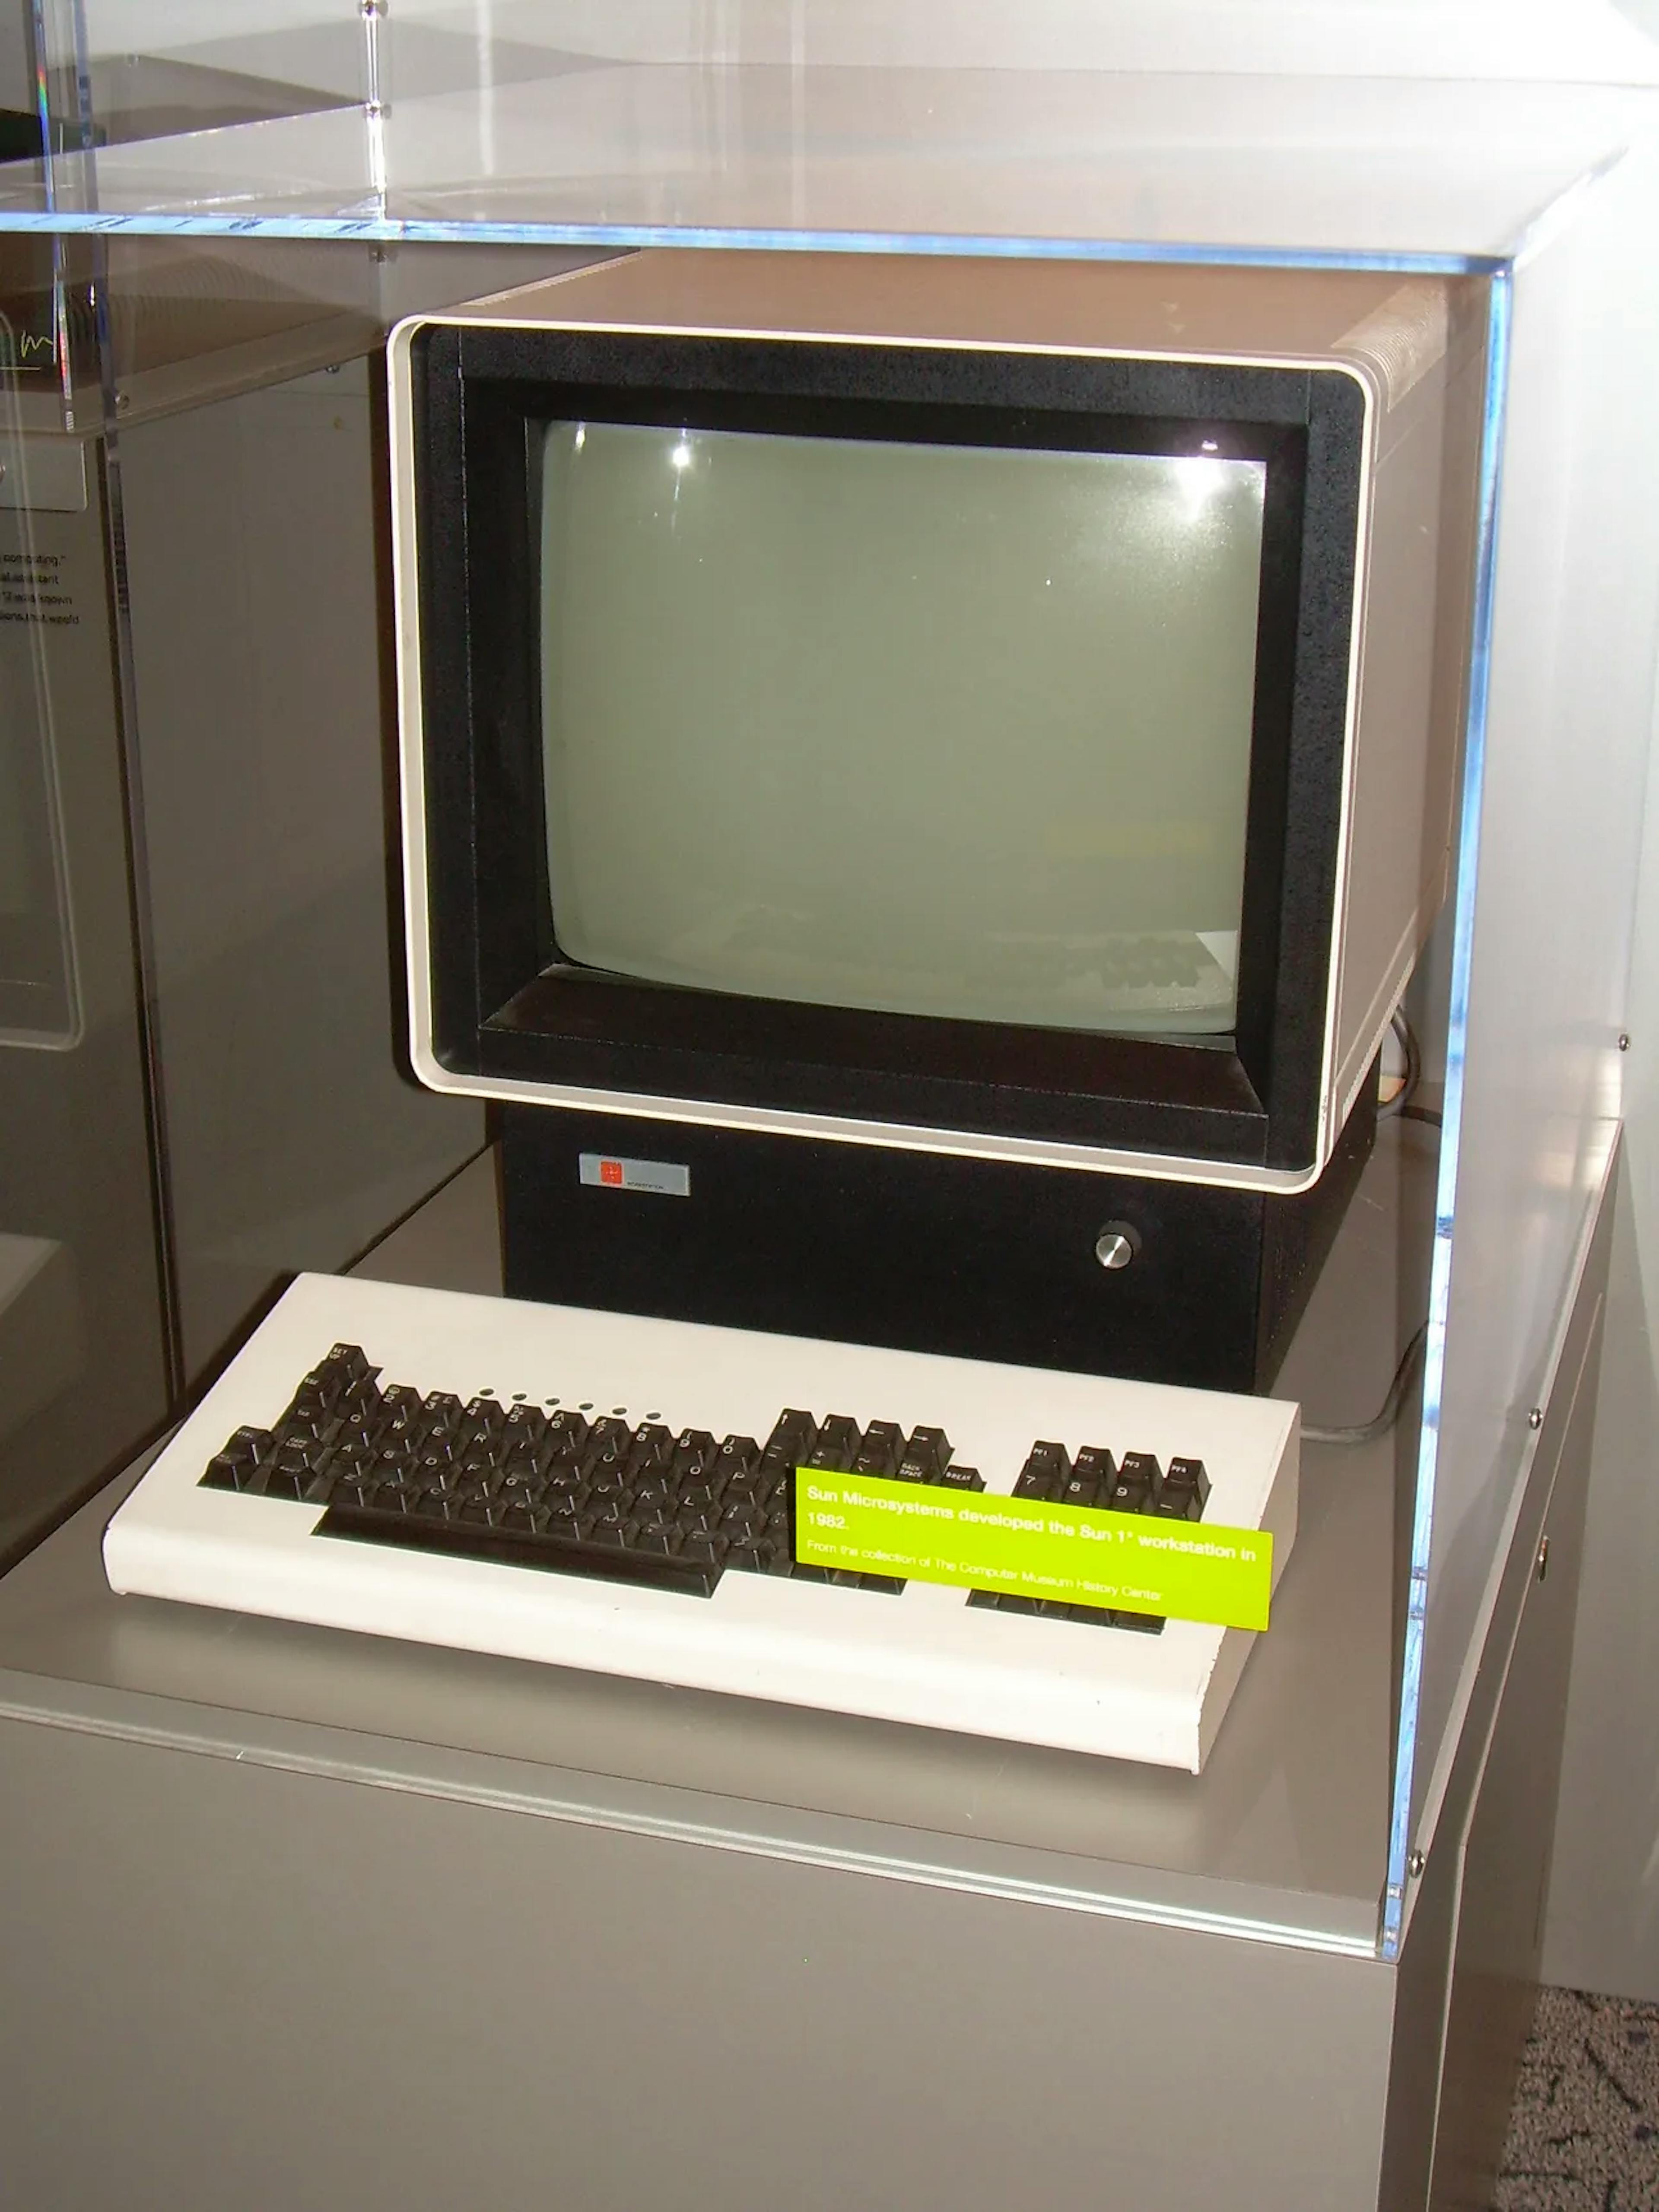 Sun-1, the first generation of UNIX computer workstations and servers produced by Sun Microsystems, launched in May 1982